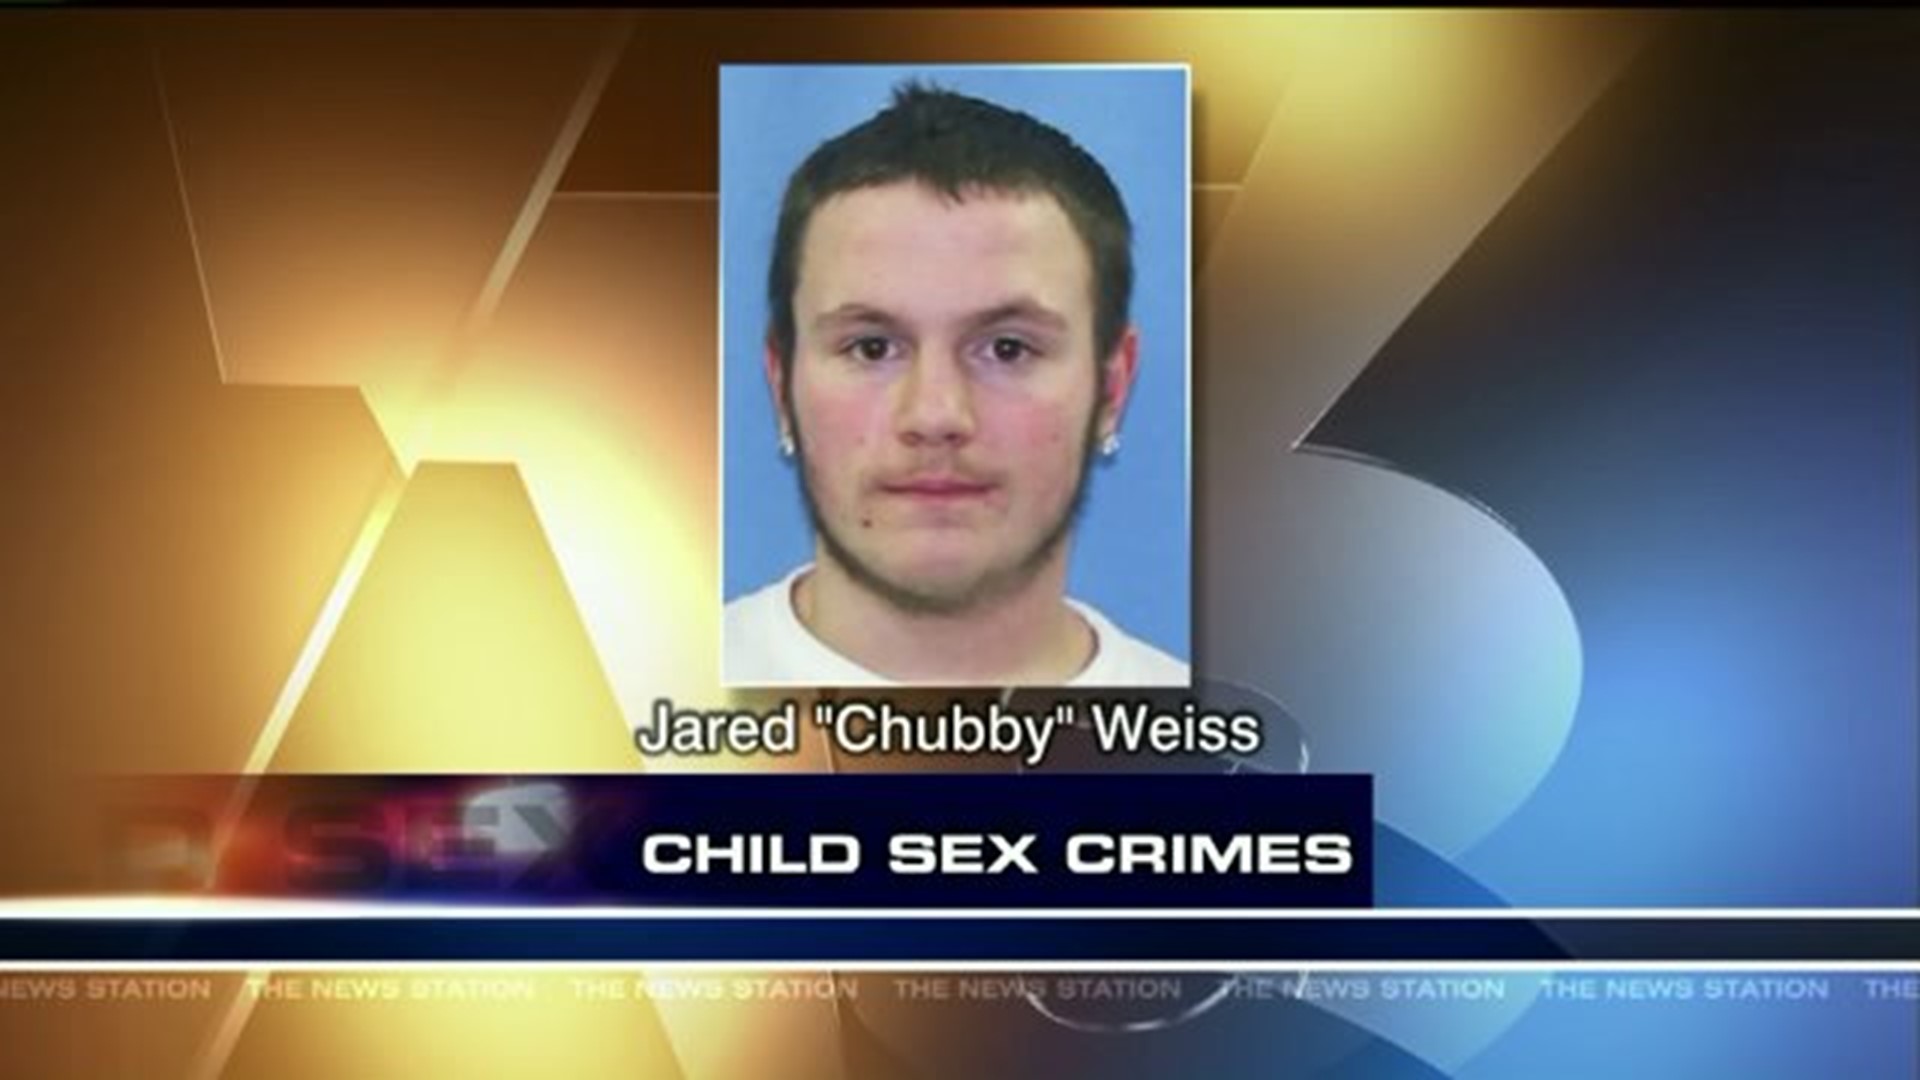 Carbon County Man Wanted on Child Sex Charges